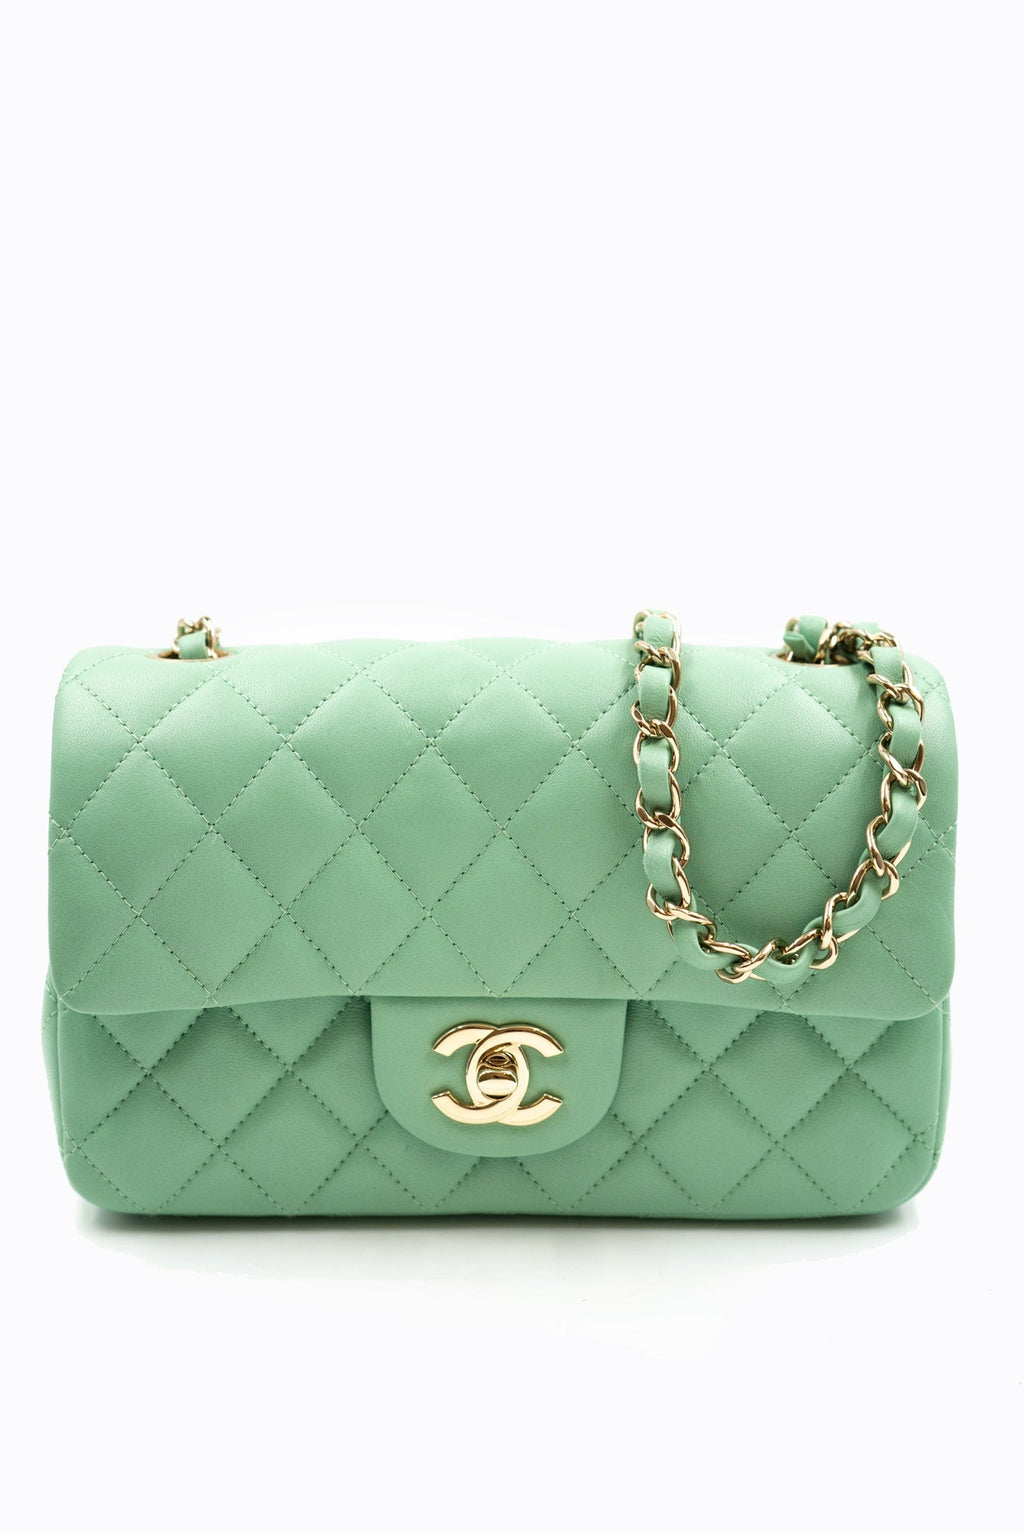 Chanel 2.55 vs the Classic Flap Bag: What is the Difference